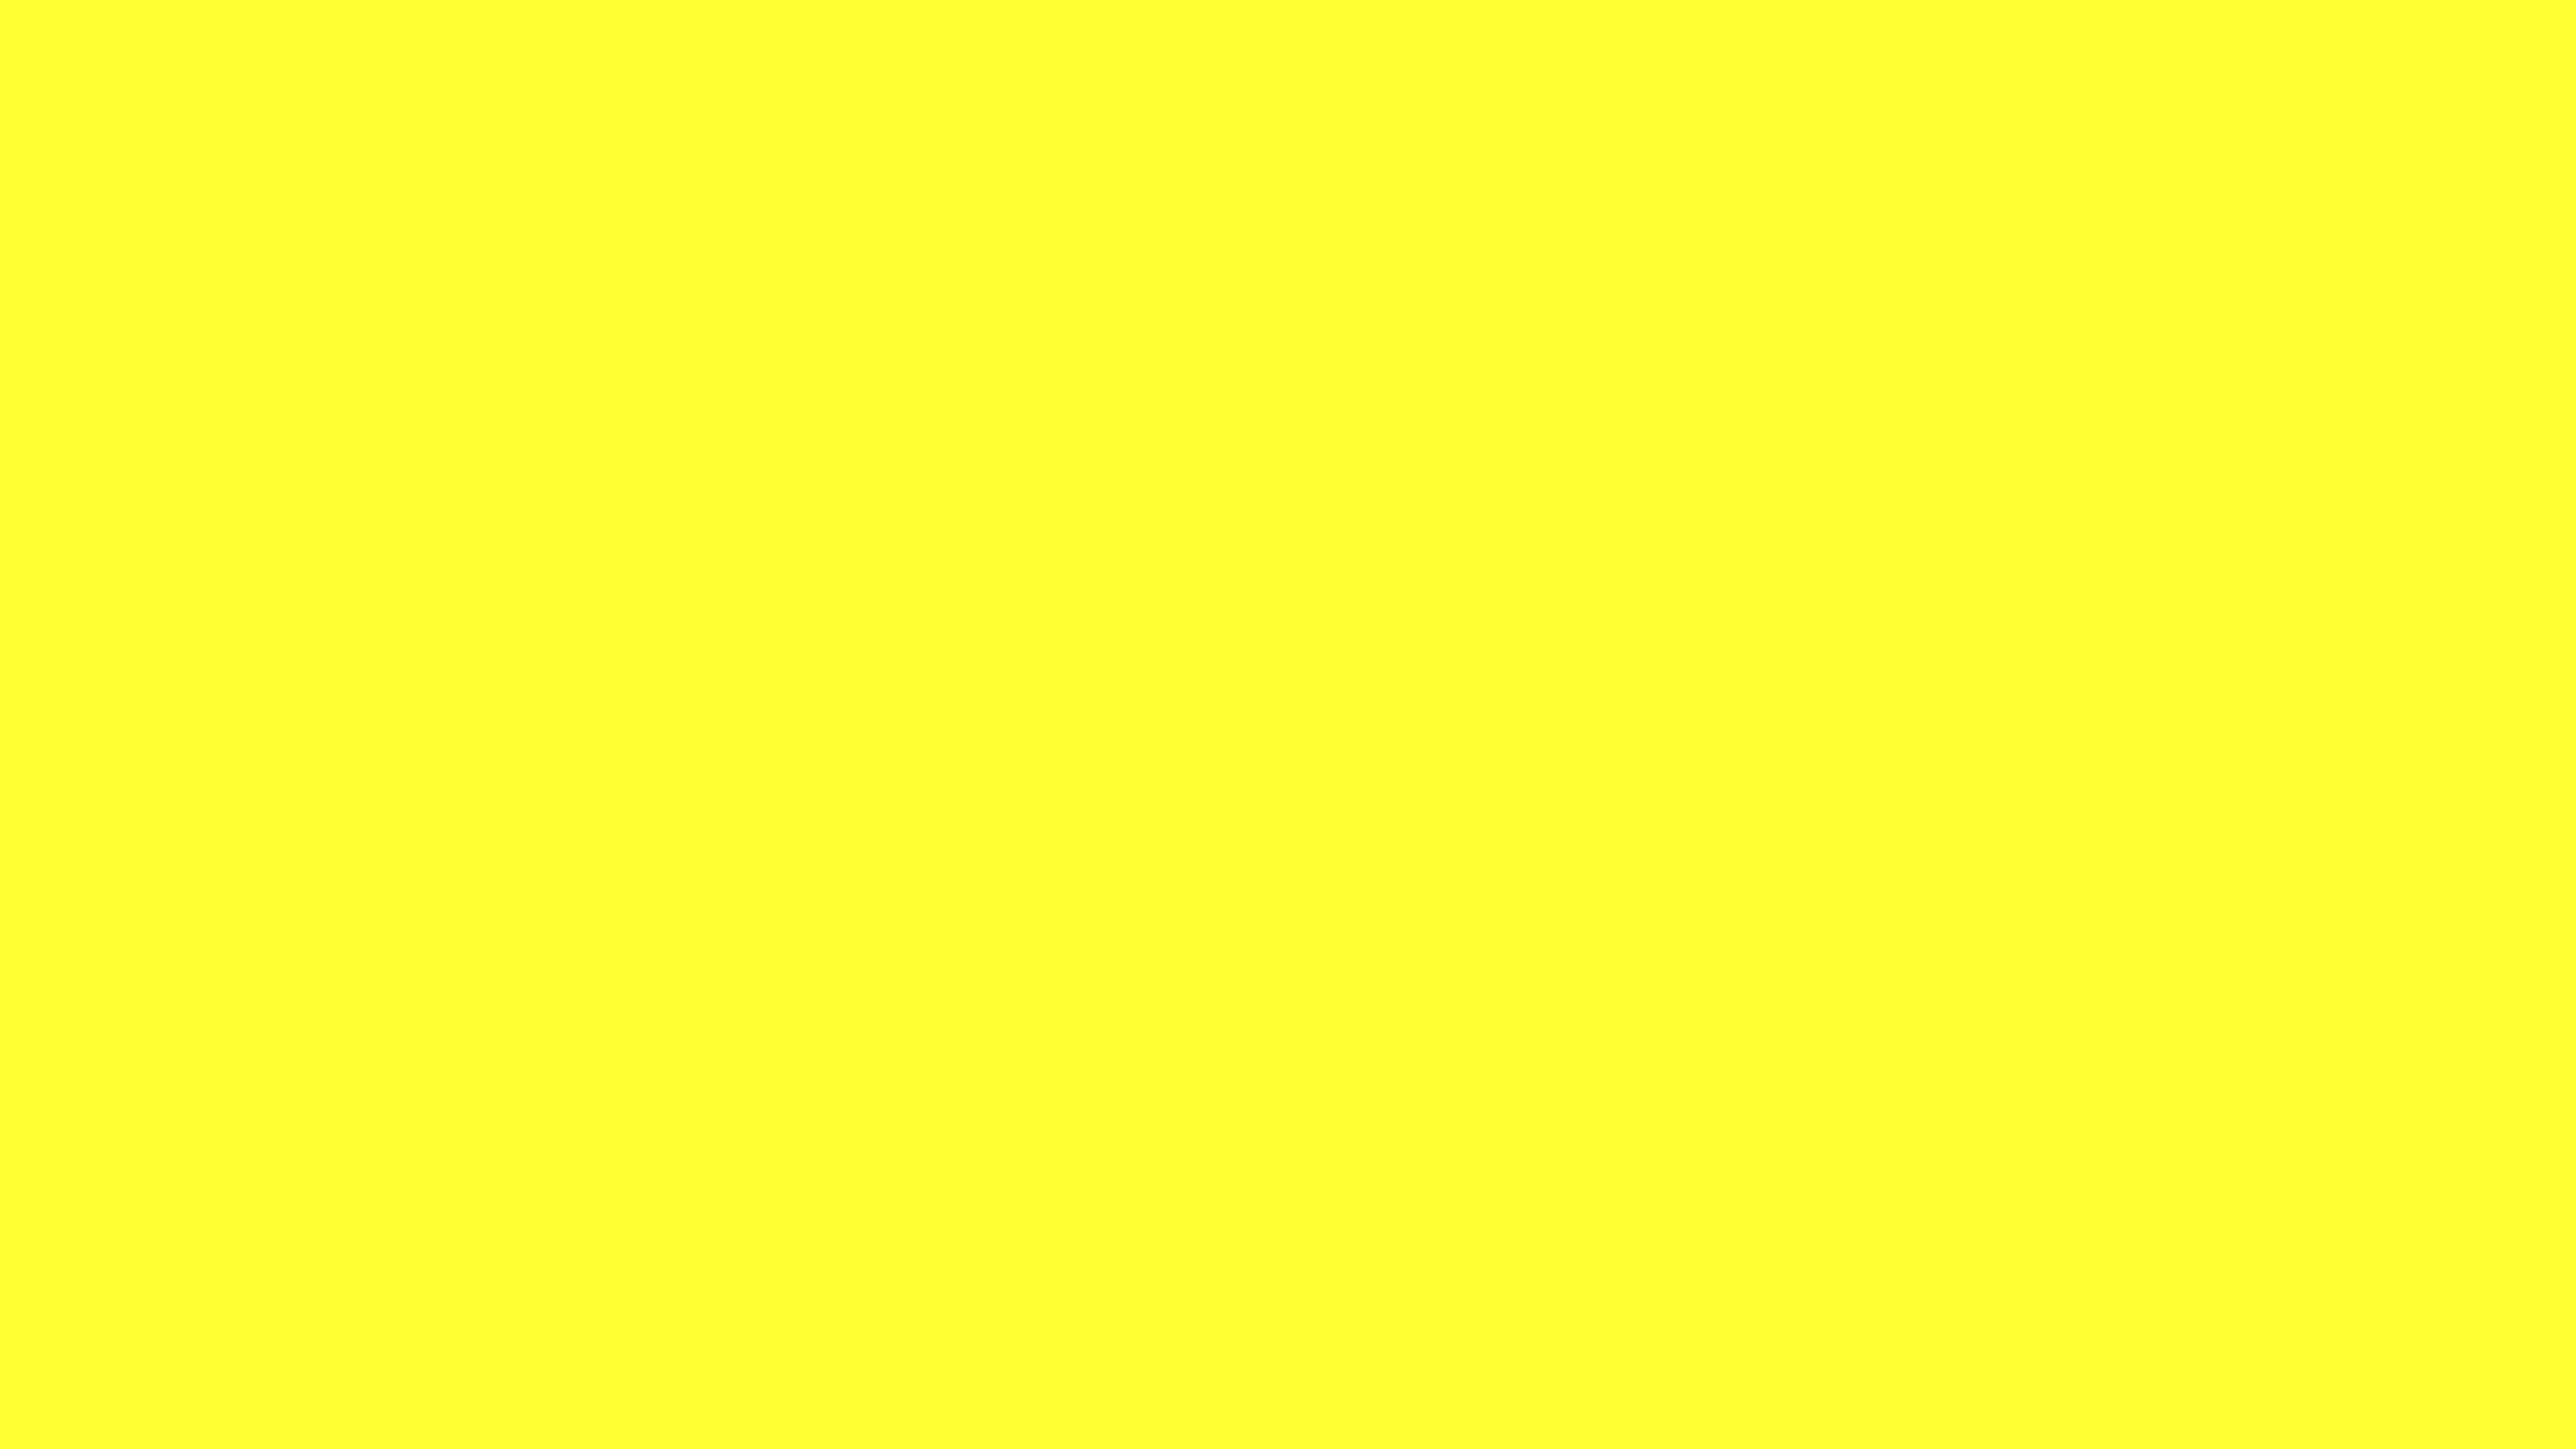 7680x4320 Electric Yellow Solid Color Background